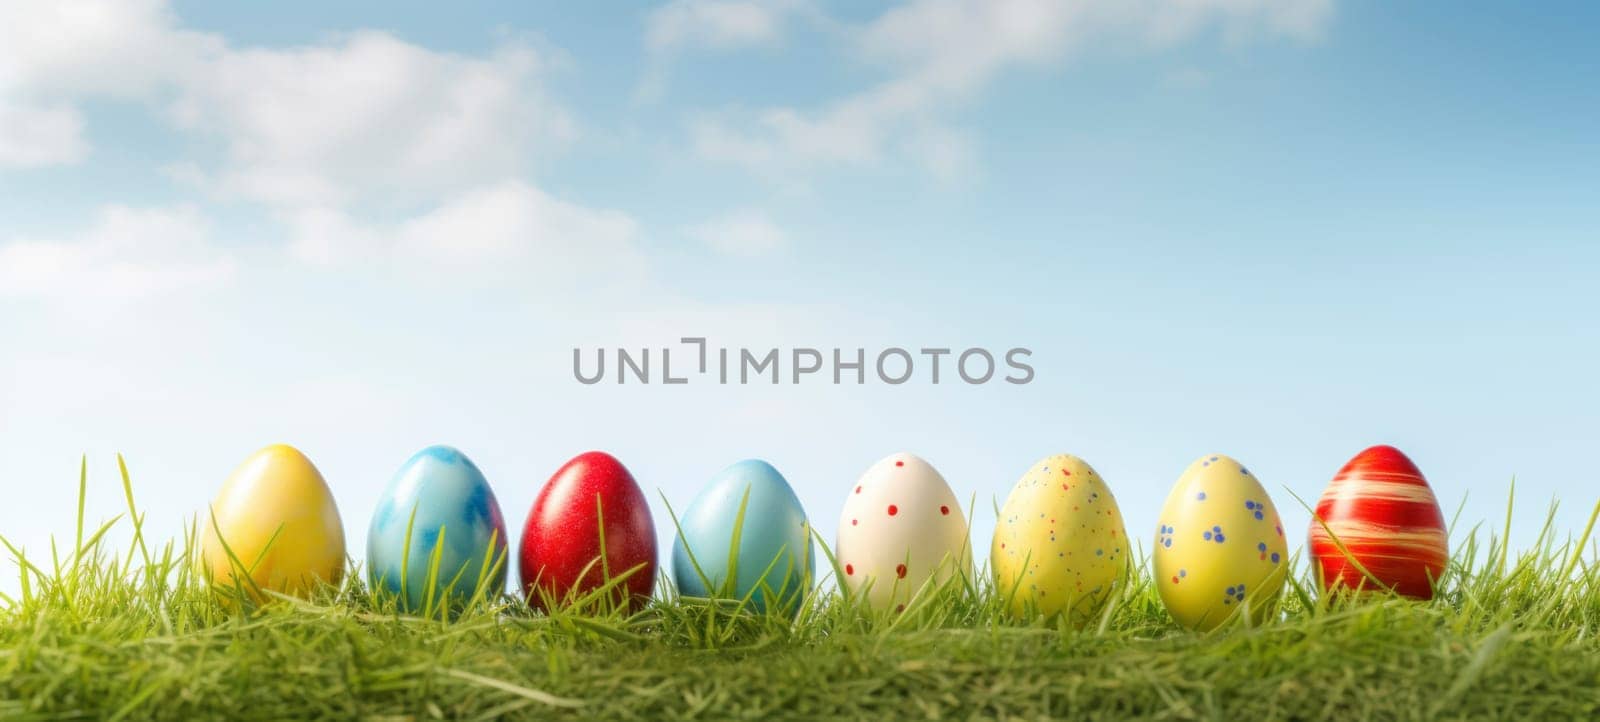 A row of colorful painted Easter eggs sitting in lush green grass under a clear blue sky, representing joy and festivity of the Easter holiday.